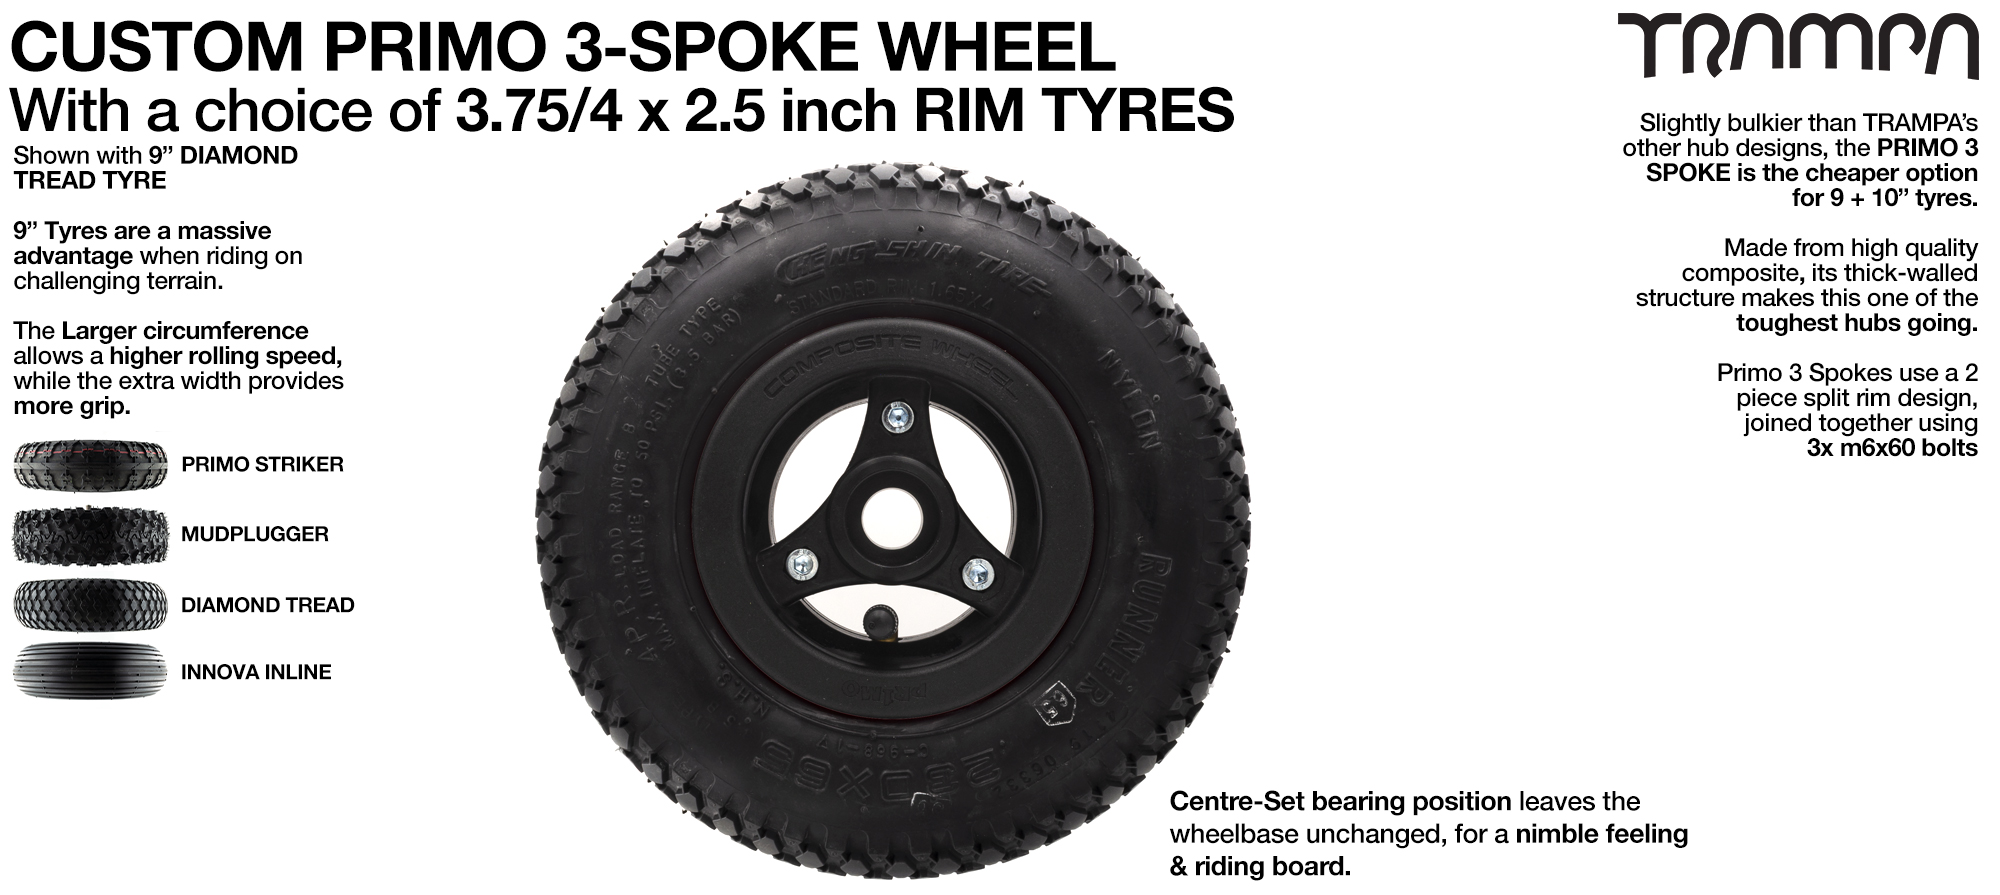 The PRIMO 3 Spoke Composite Hub fits all 3.75/4 rimmed tyres. (6-10 Inch) When fitted the tyres inflate to 2.5 Inch wide - PRIMO hubs are perfect for 9 & 10 inch tyres.